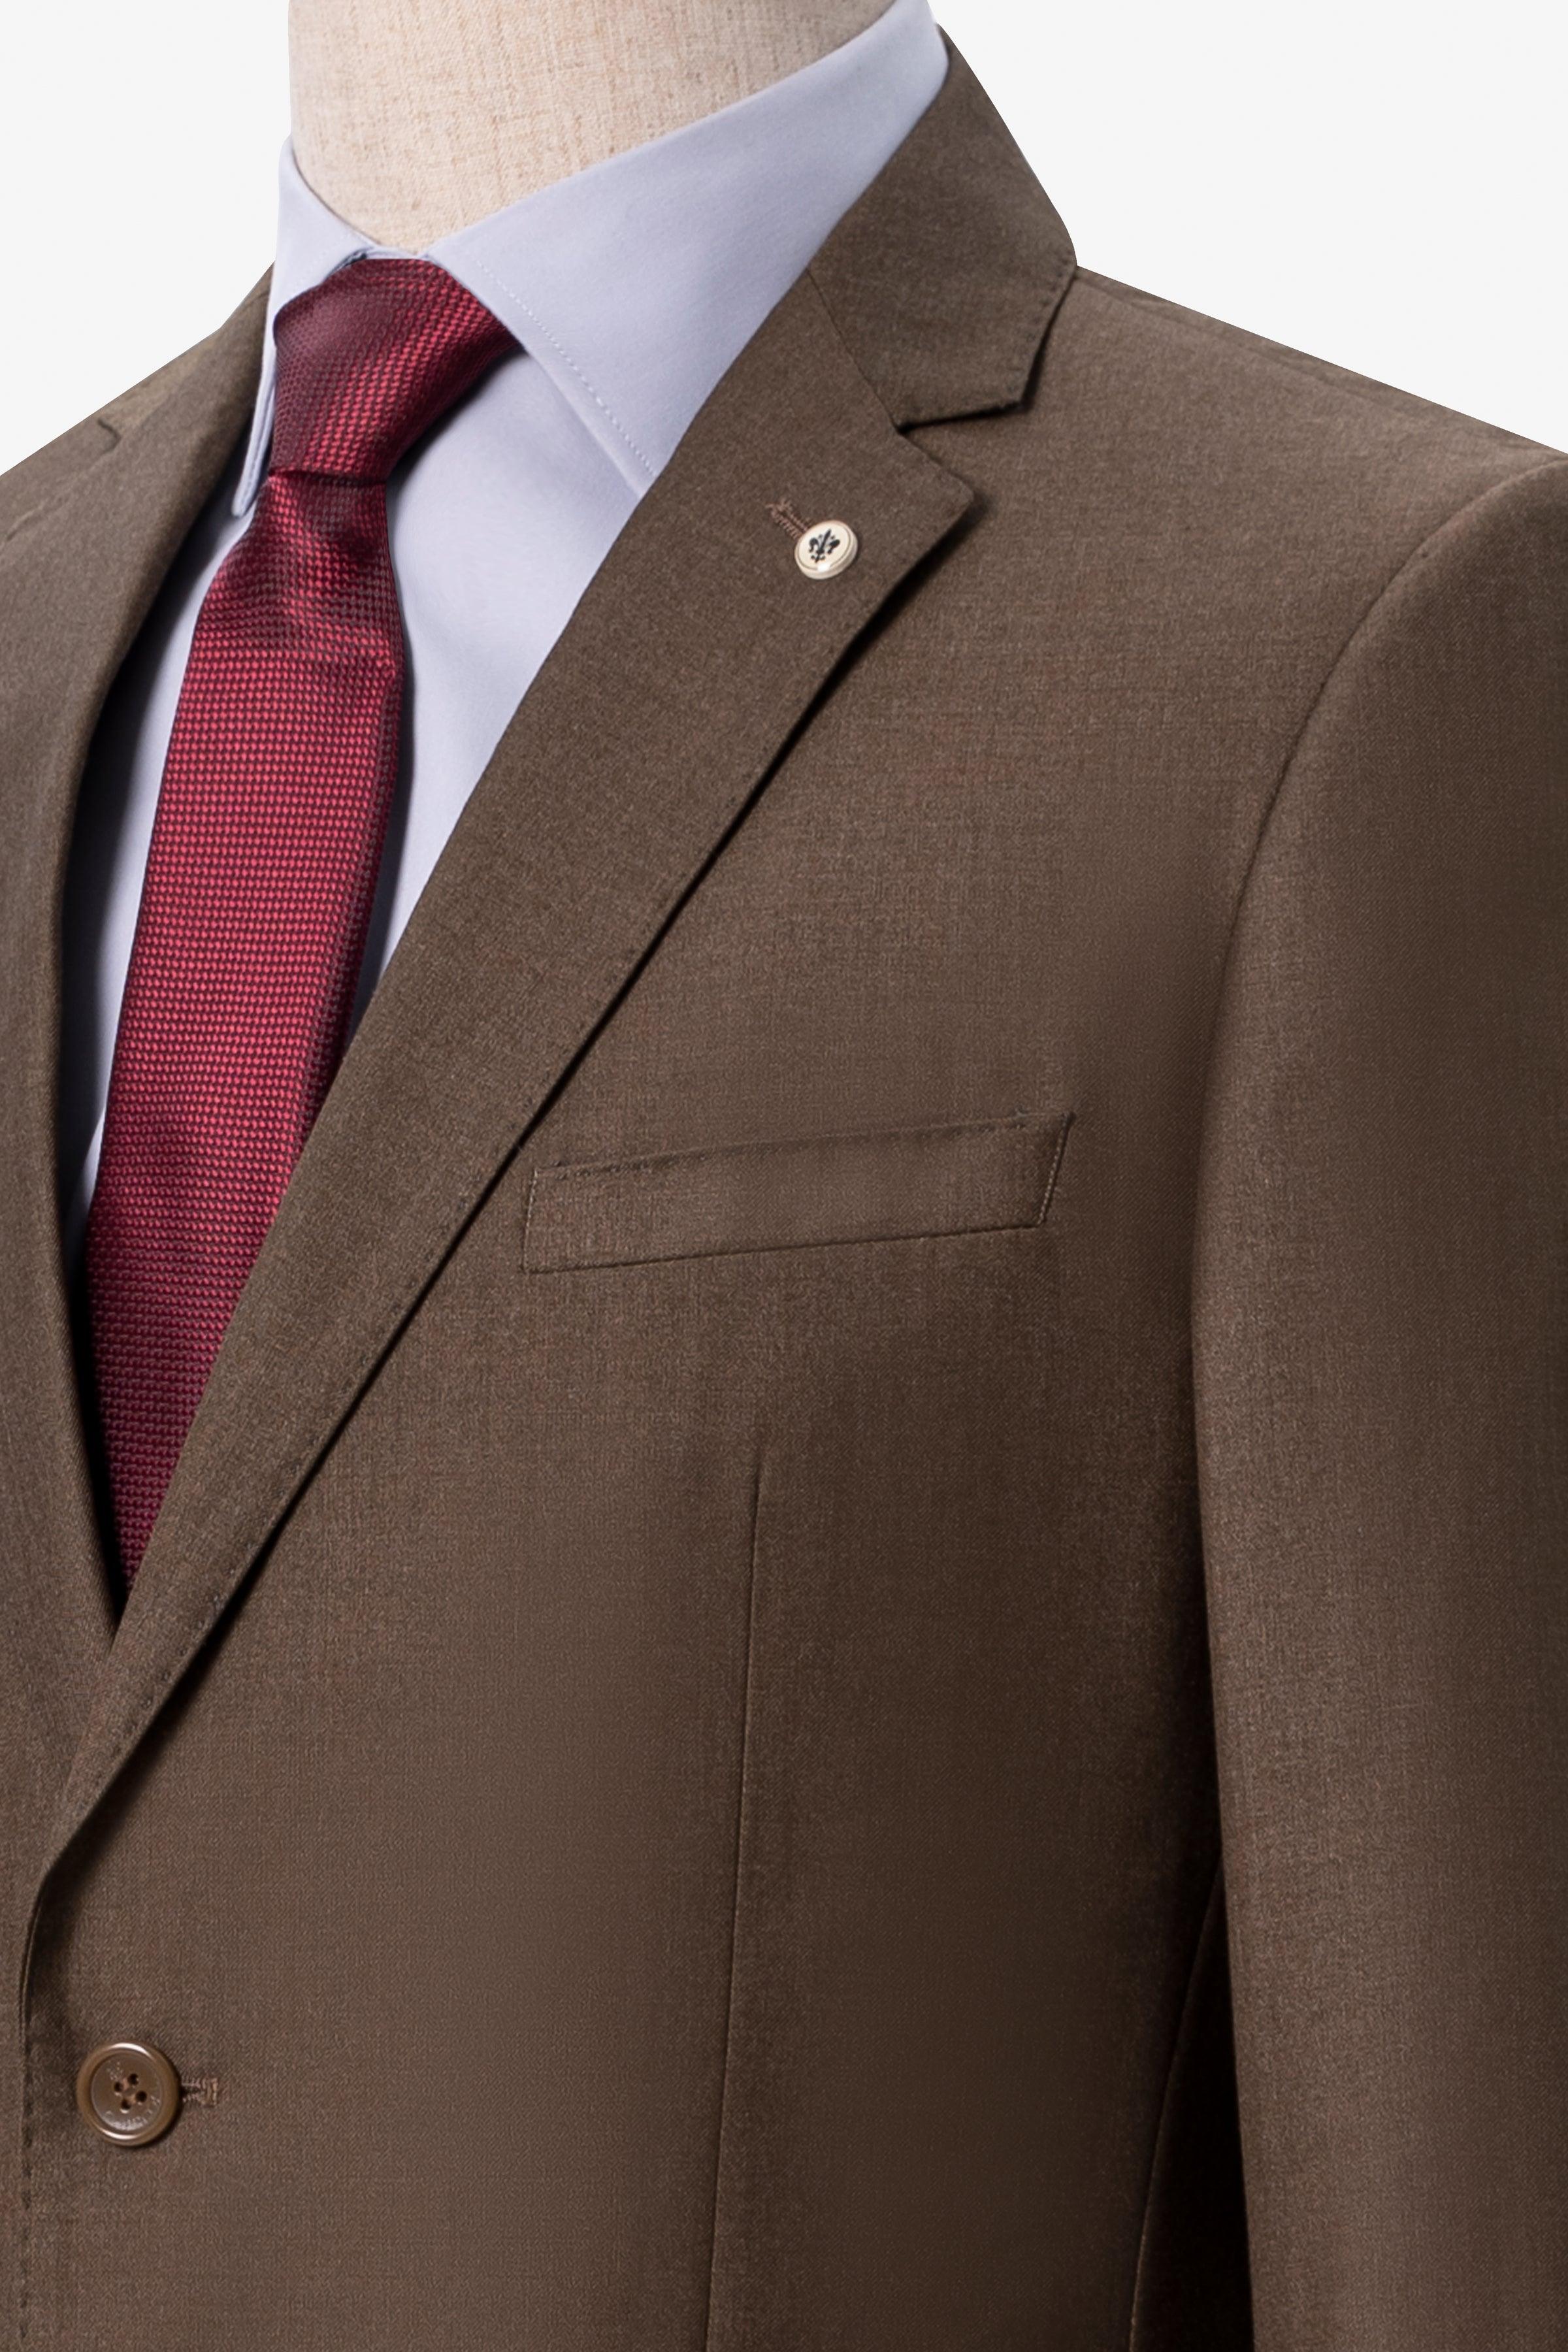 TWO PIECE SUIT LIGHT BROWN at Charcoal Clothing